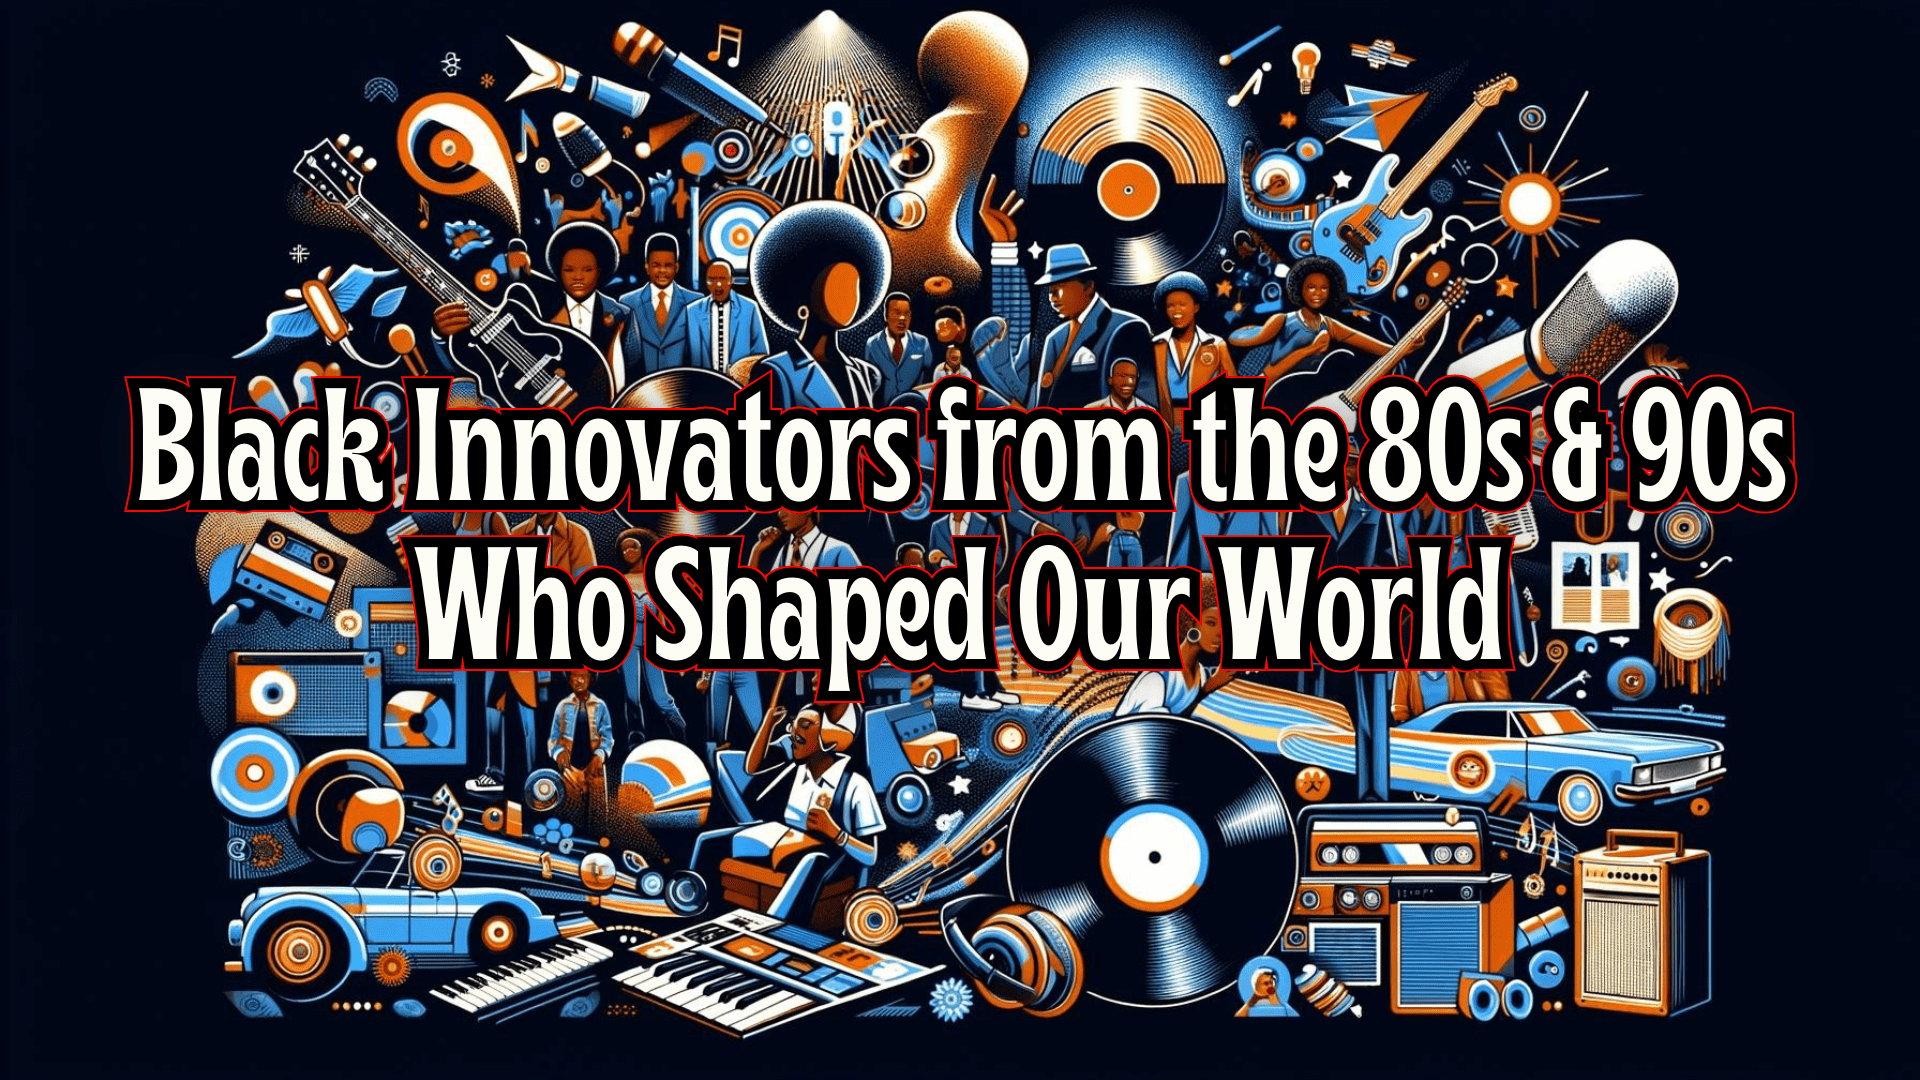 Black Innovators from the 80s & 90s Who Shaped Our World